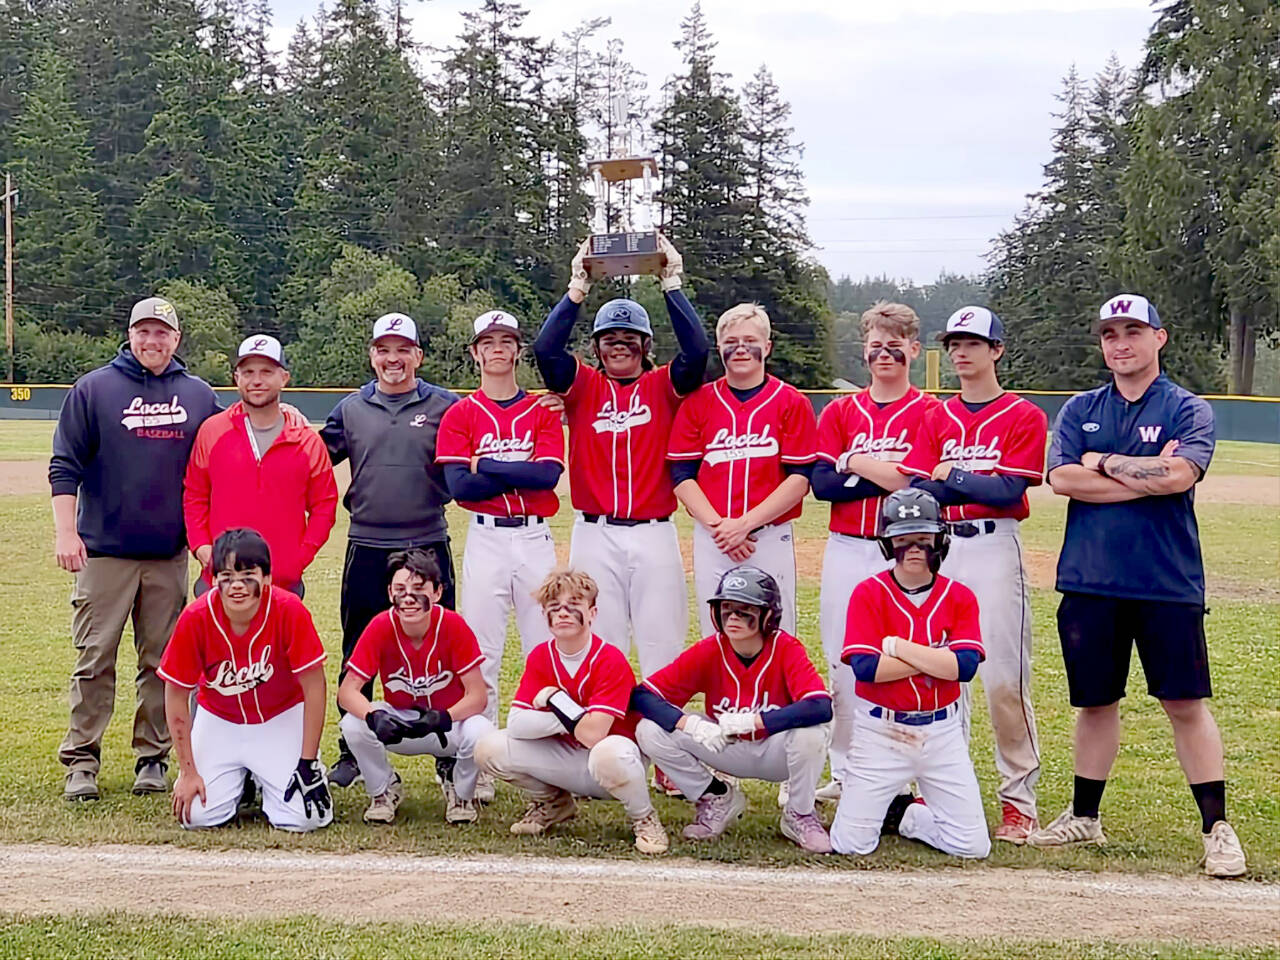 Local 155 is the Olympic Junior Babe Ruth champion. From left, back row, are coach Kelly Perry, coach Travis Waddell, coach Mike Mudd, Ian Smithson, Chris Jaynes, Brandt Perry, Jaron Tolliver, Bryce Deleon and coach Jackson Alvord. From left, front row, are Isaac Charles, Felix Gonzales, Carson Waddell, Alik Ross and Ethan Barbre. Not pictured is coach Seth Scofield. (Courtesy photo)